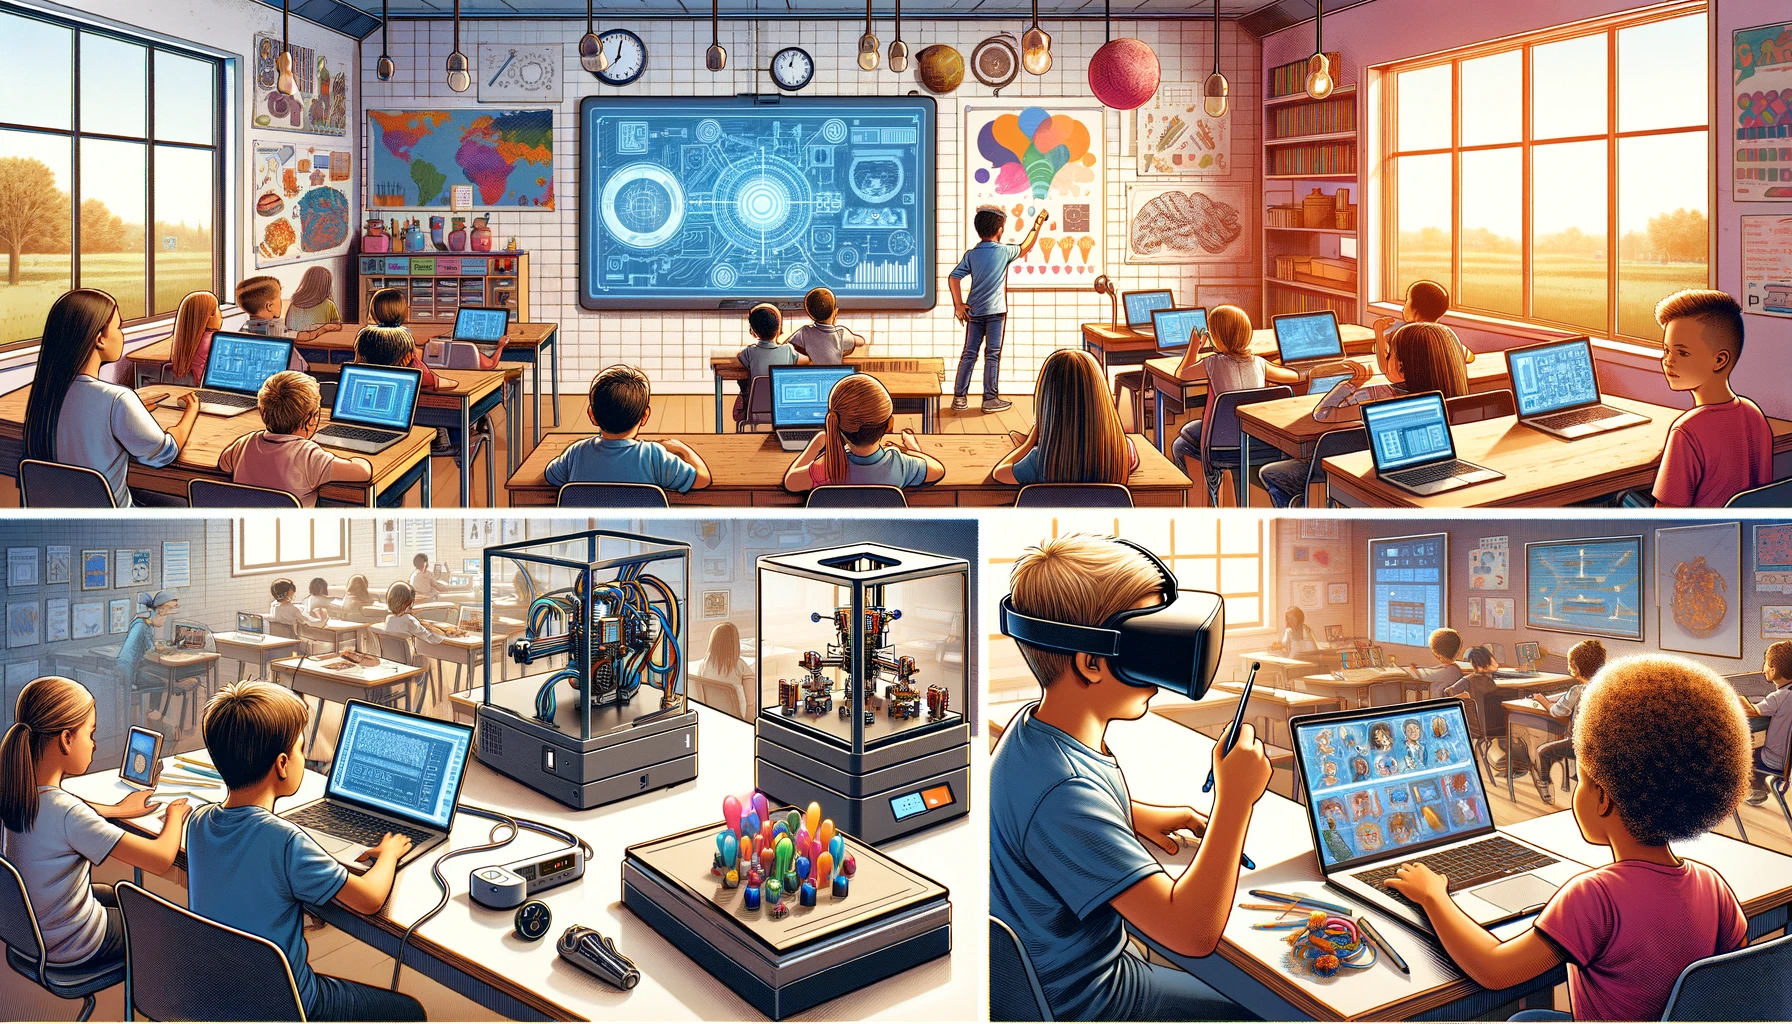 impact of technology in U.S. classrooms with a focus on hands-on learning, in a landscape